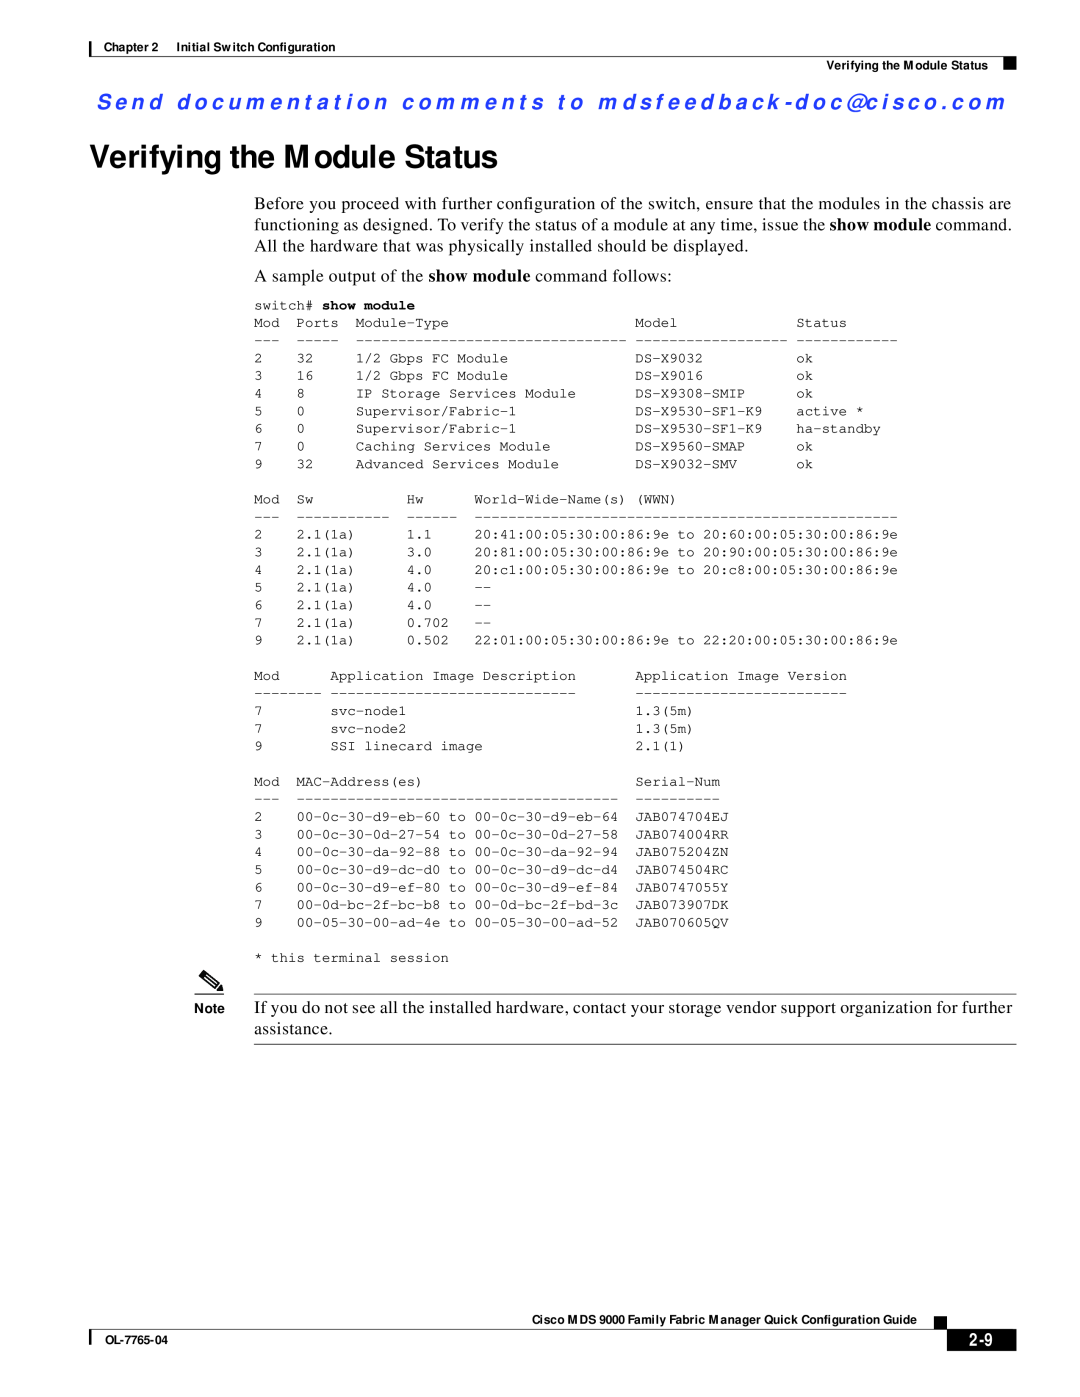 Cisco Systems OL-7765-04 manual Verifying the Module Status 